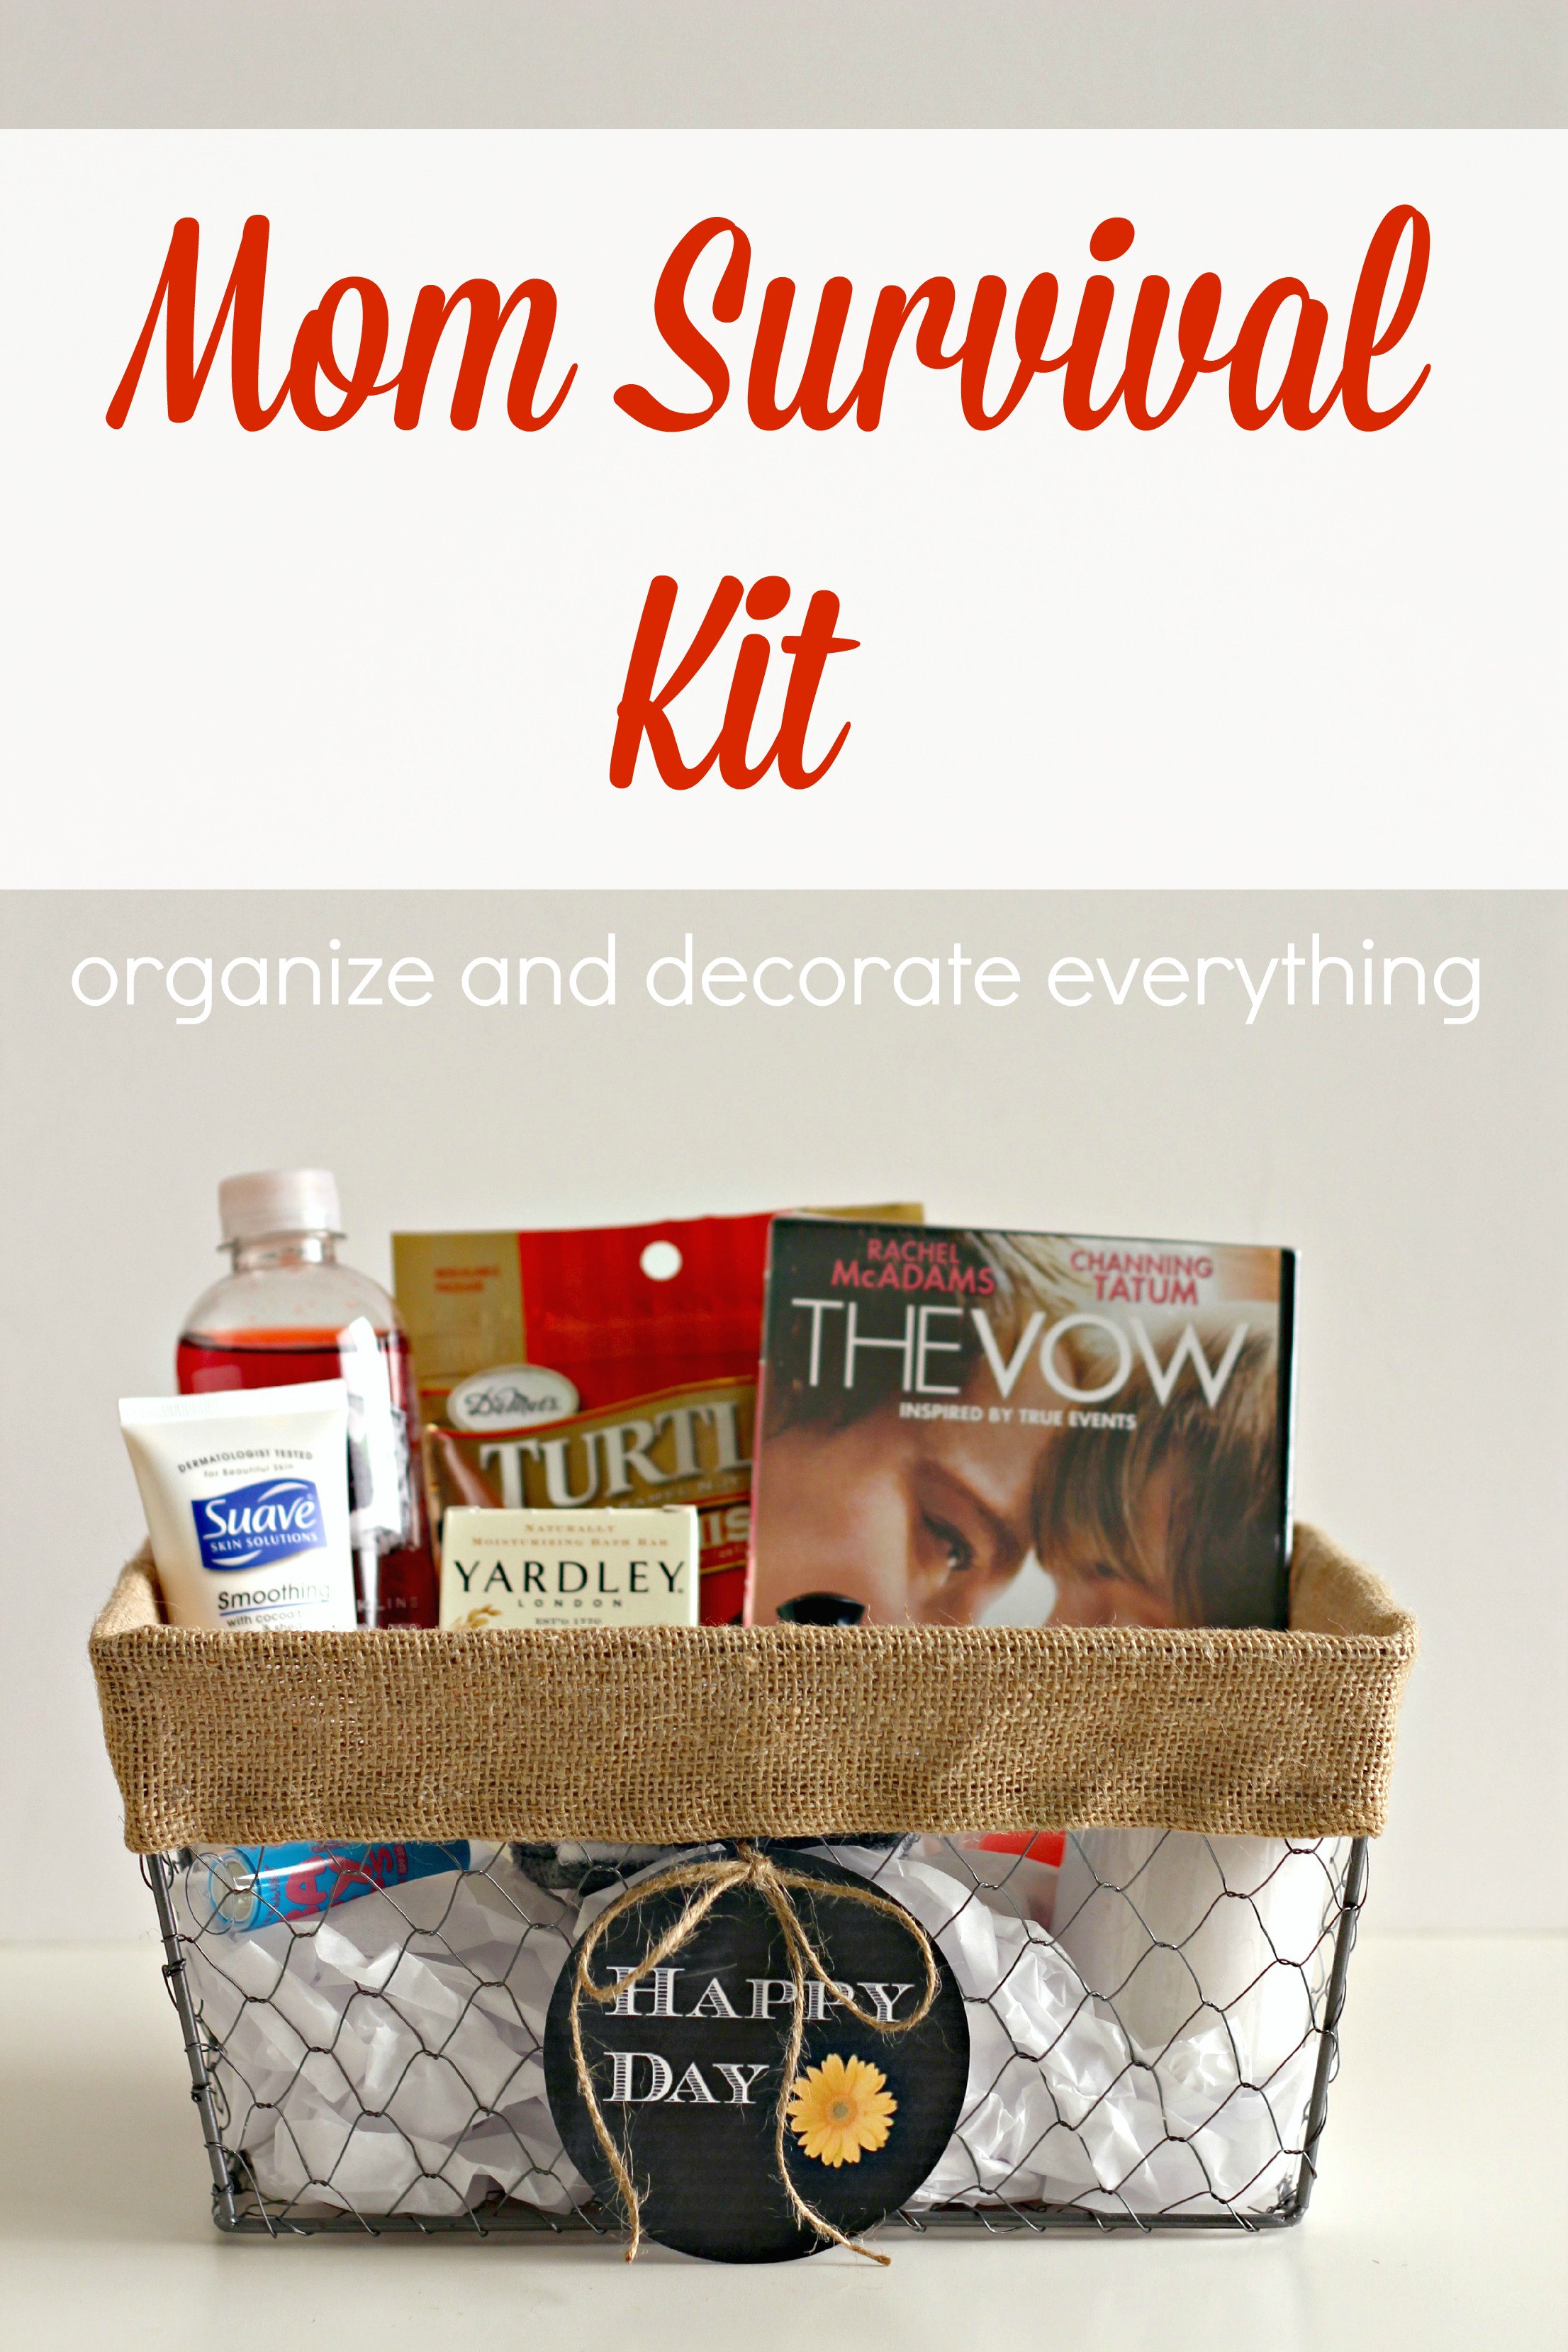 Mom Survival Kit for Mother's Day or any day